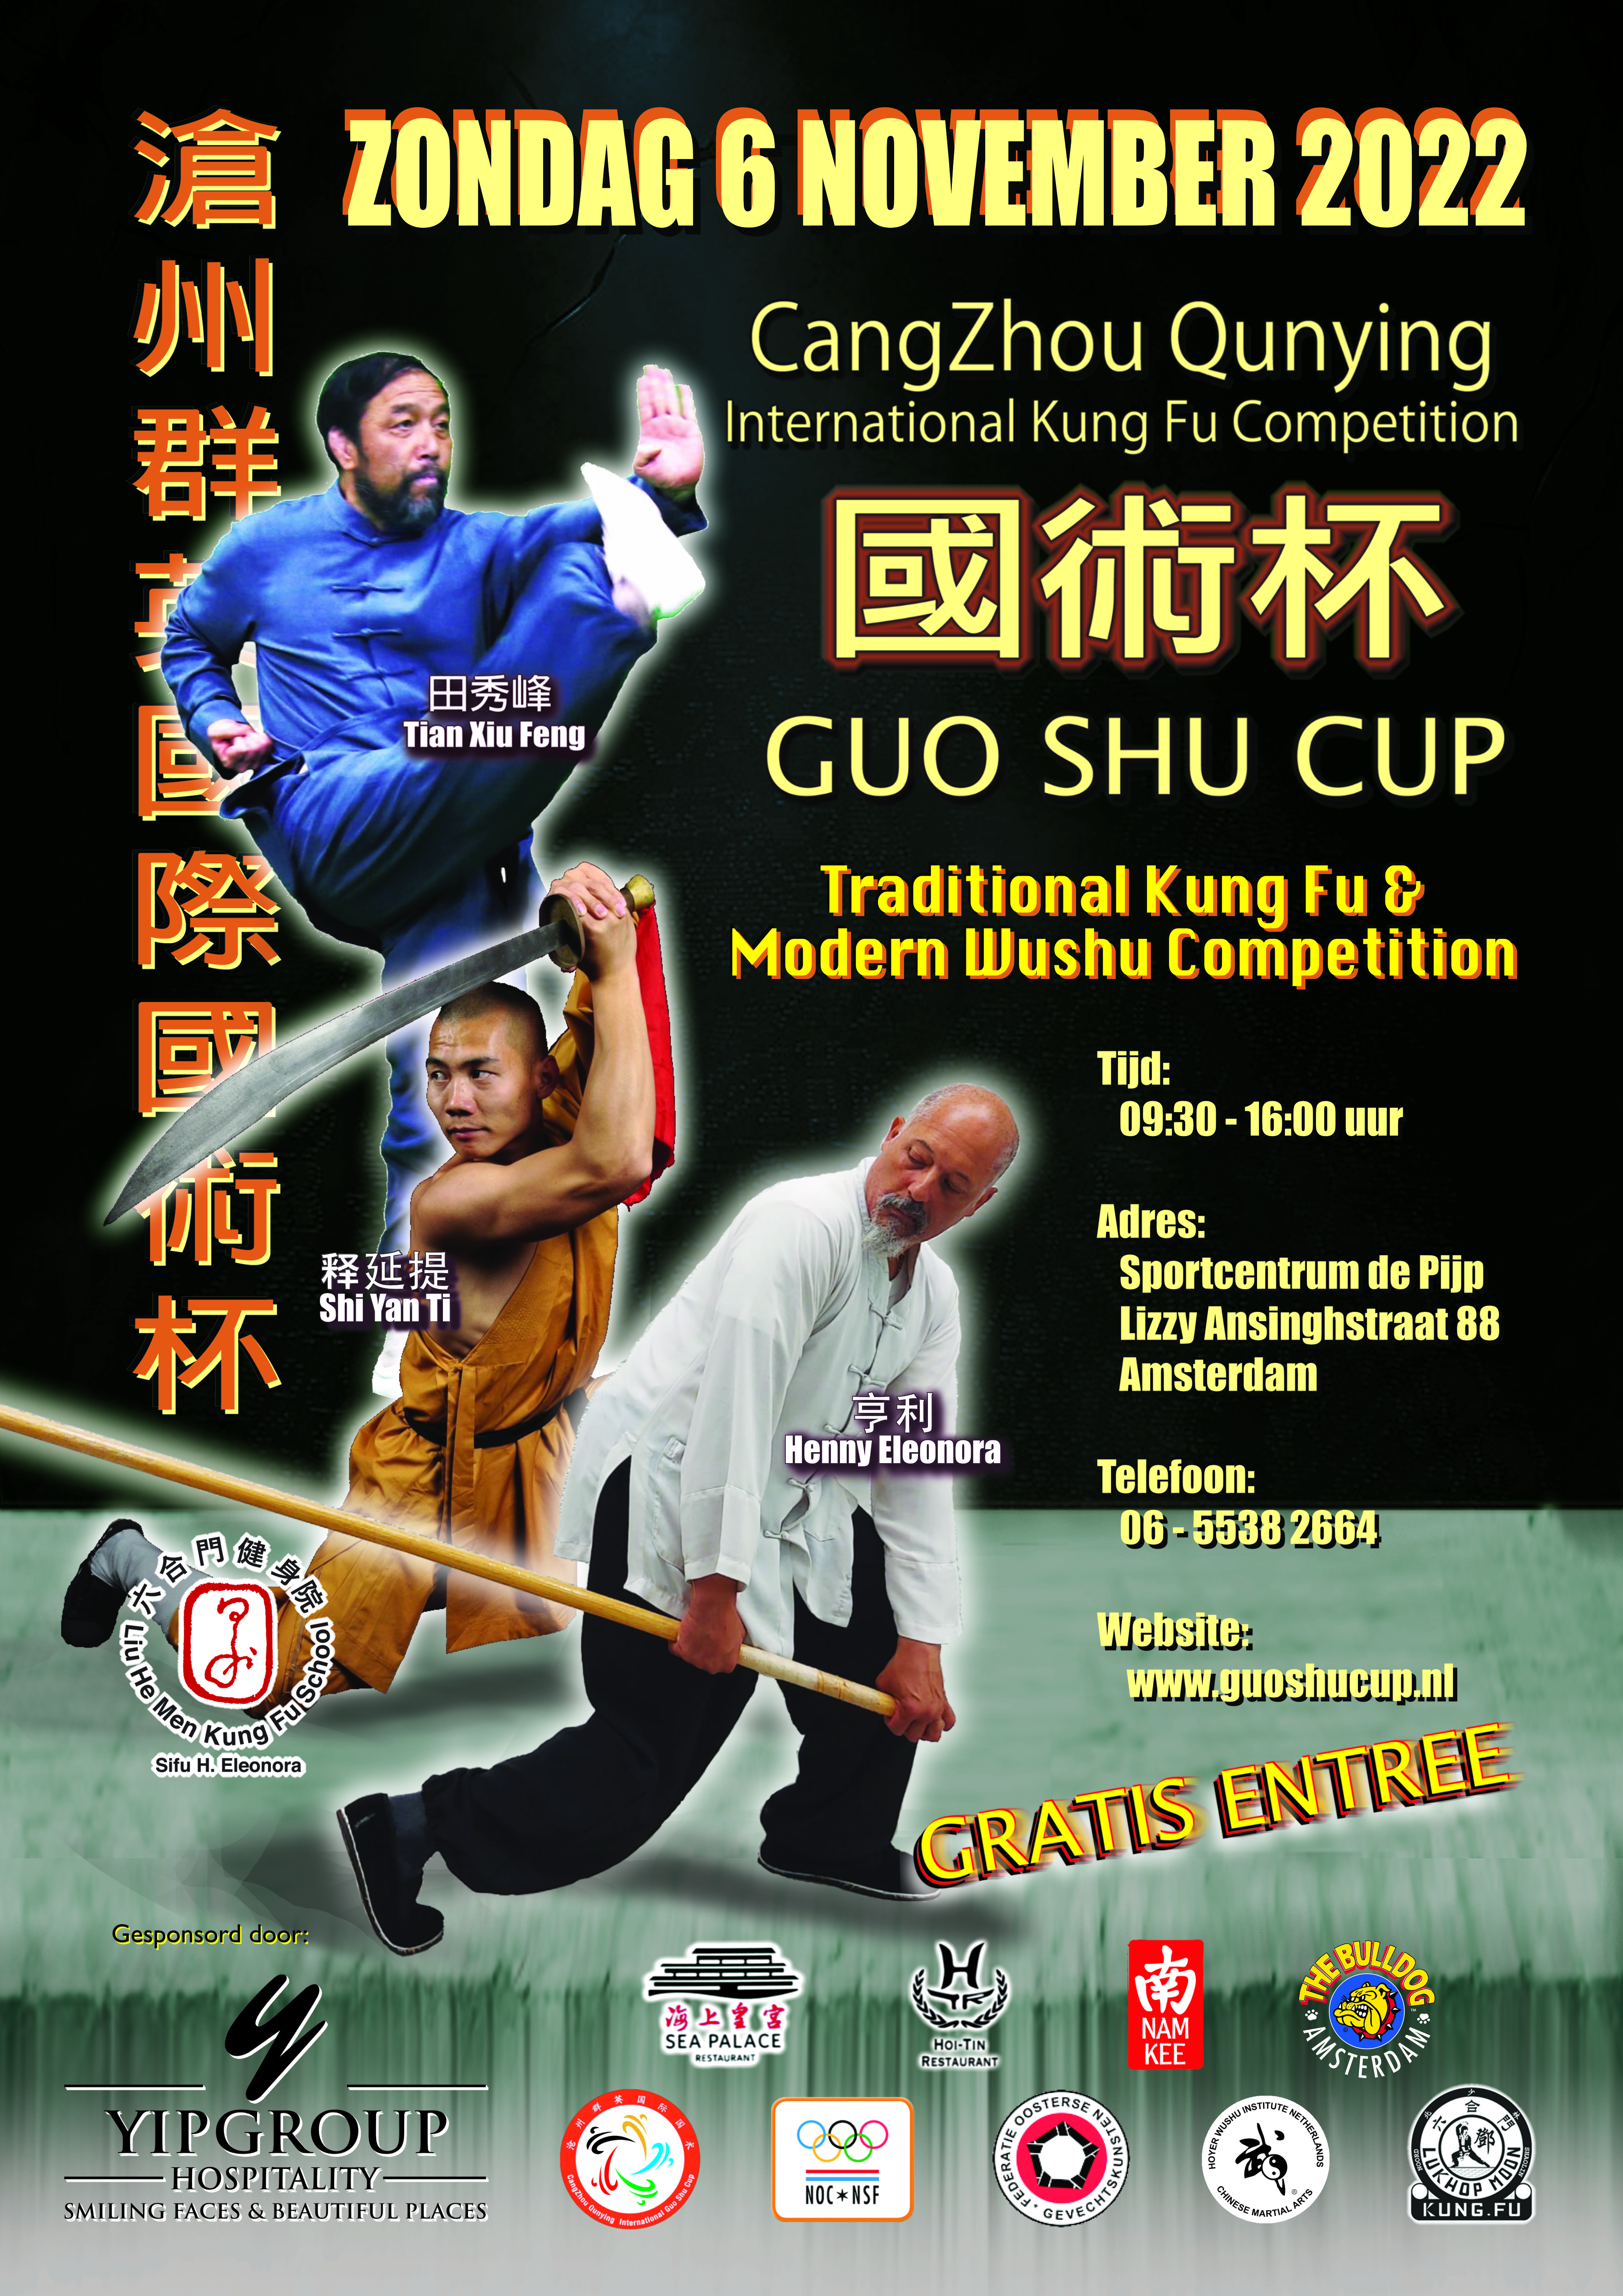 The poster of Guo Shu Cup 2022